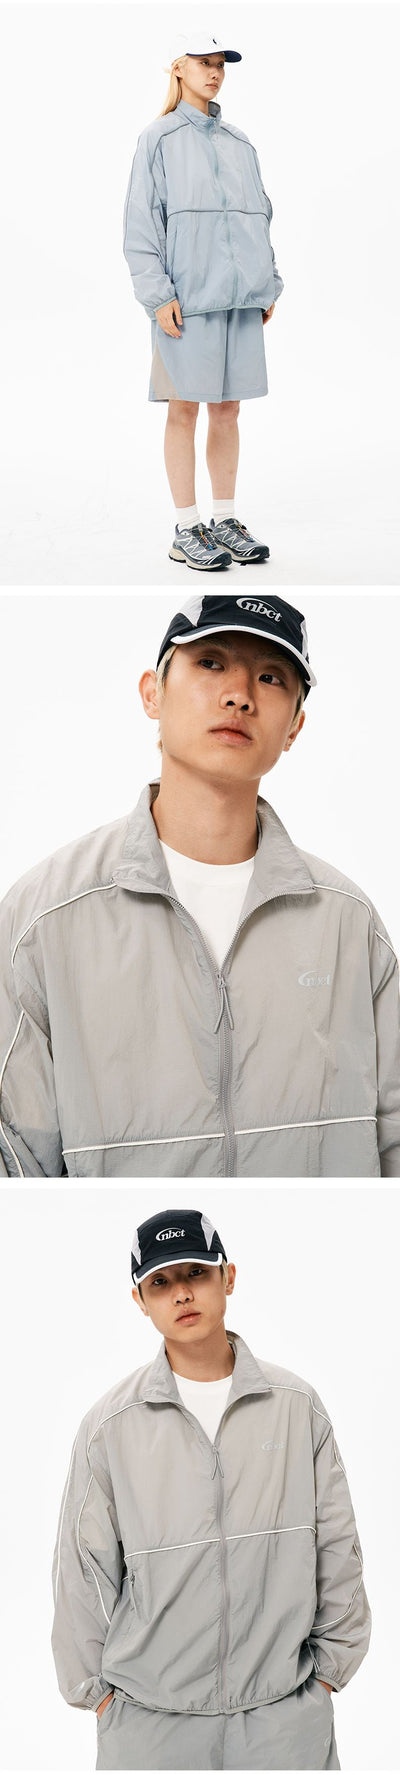 Athleisure Thin Lines Windbreaker Jacket Korean Street Fashion Jacket By Nothing But Chill Shop Online at OH Vault